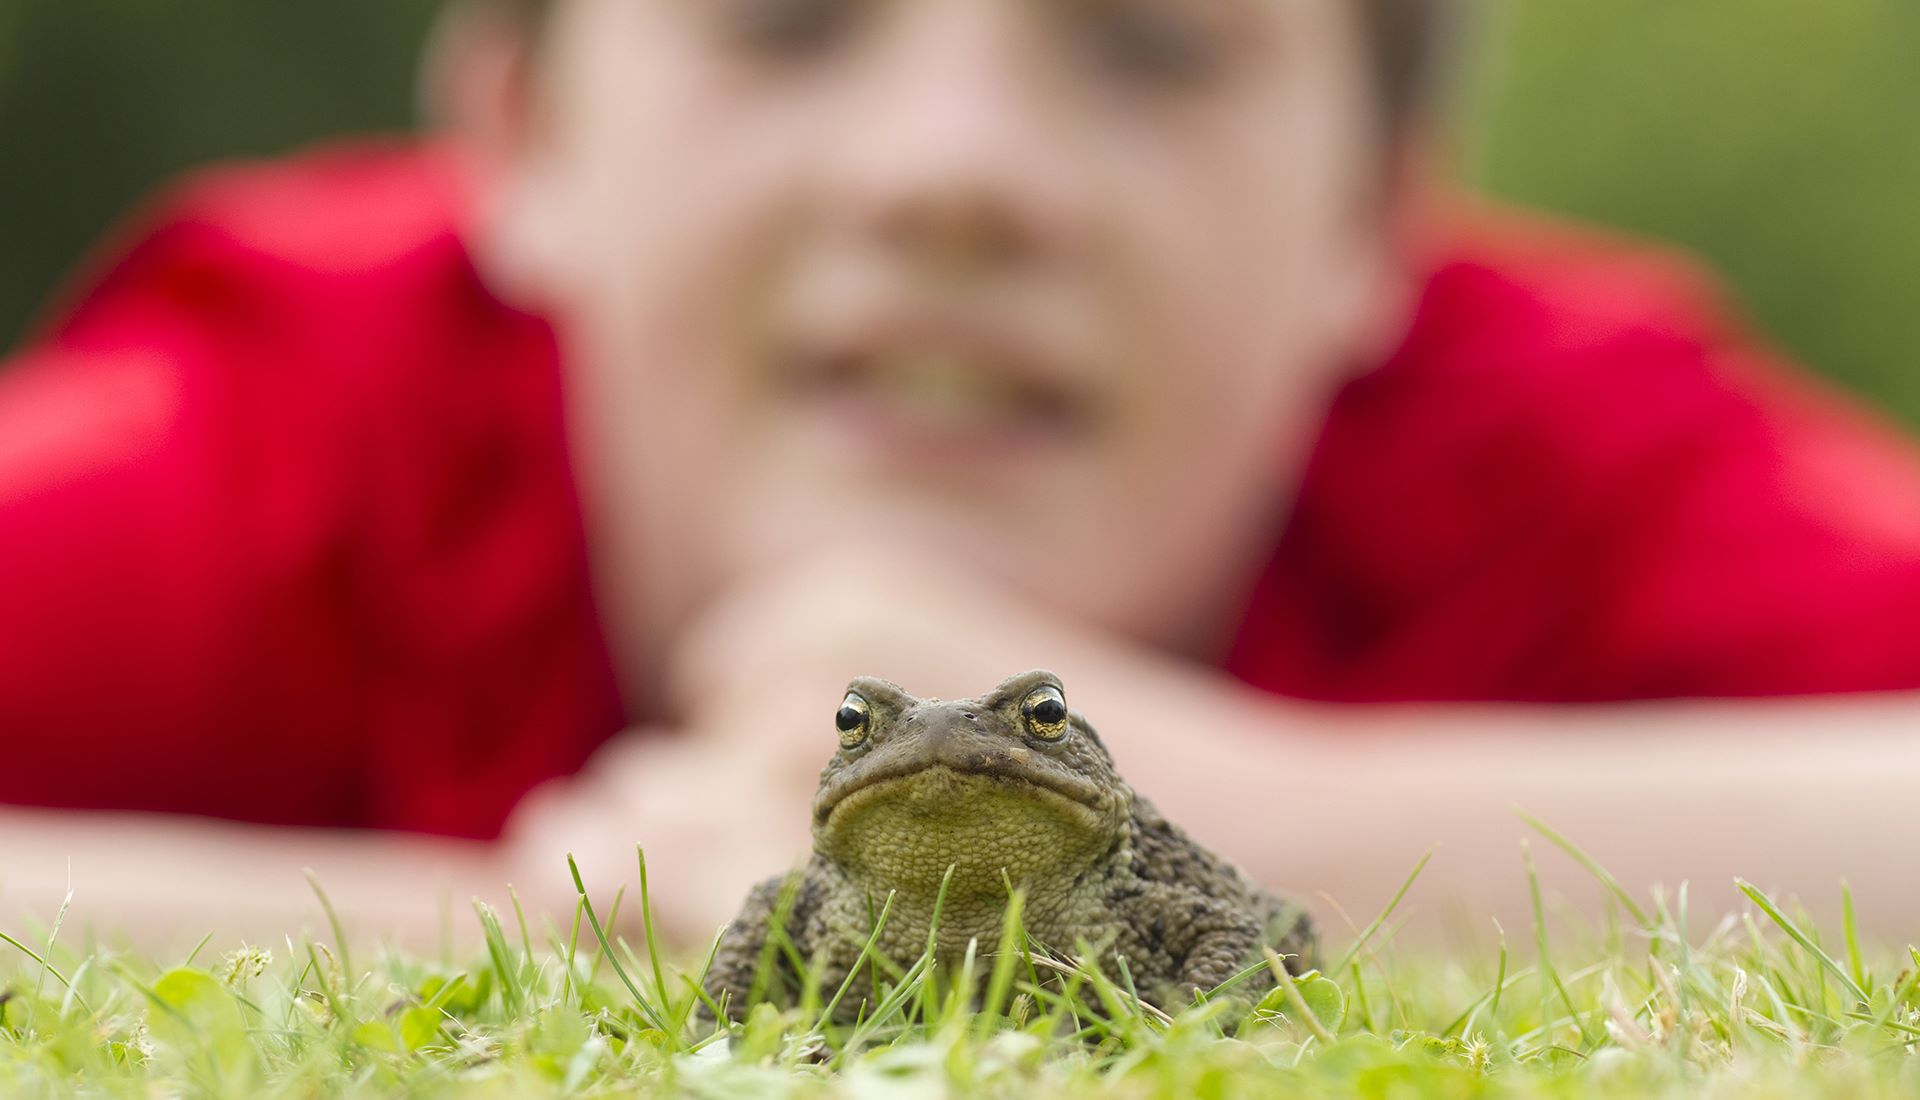 Toad (Bufo bufo)  in garden with young boy looking on, Scotland.